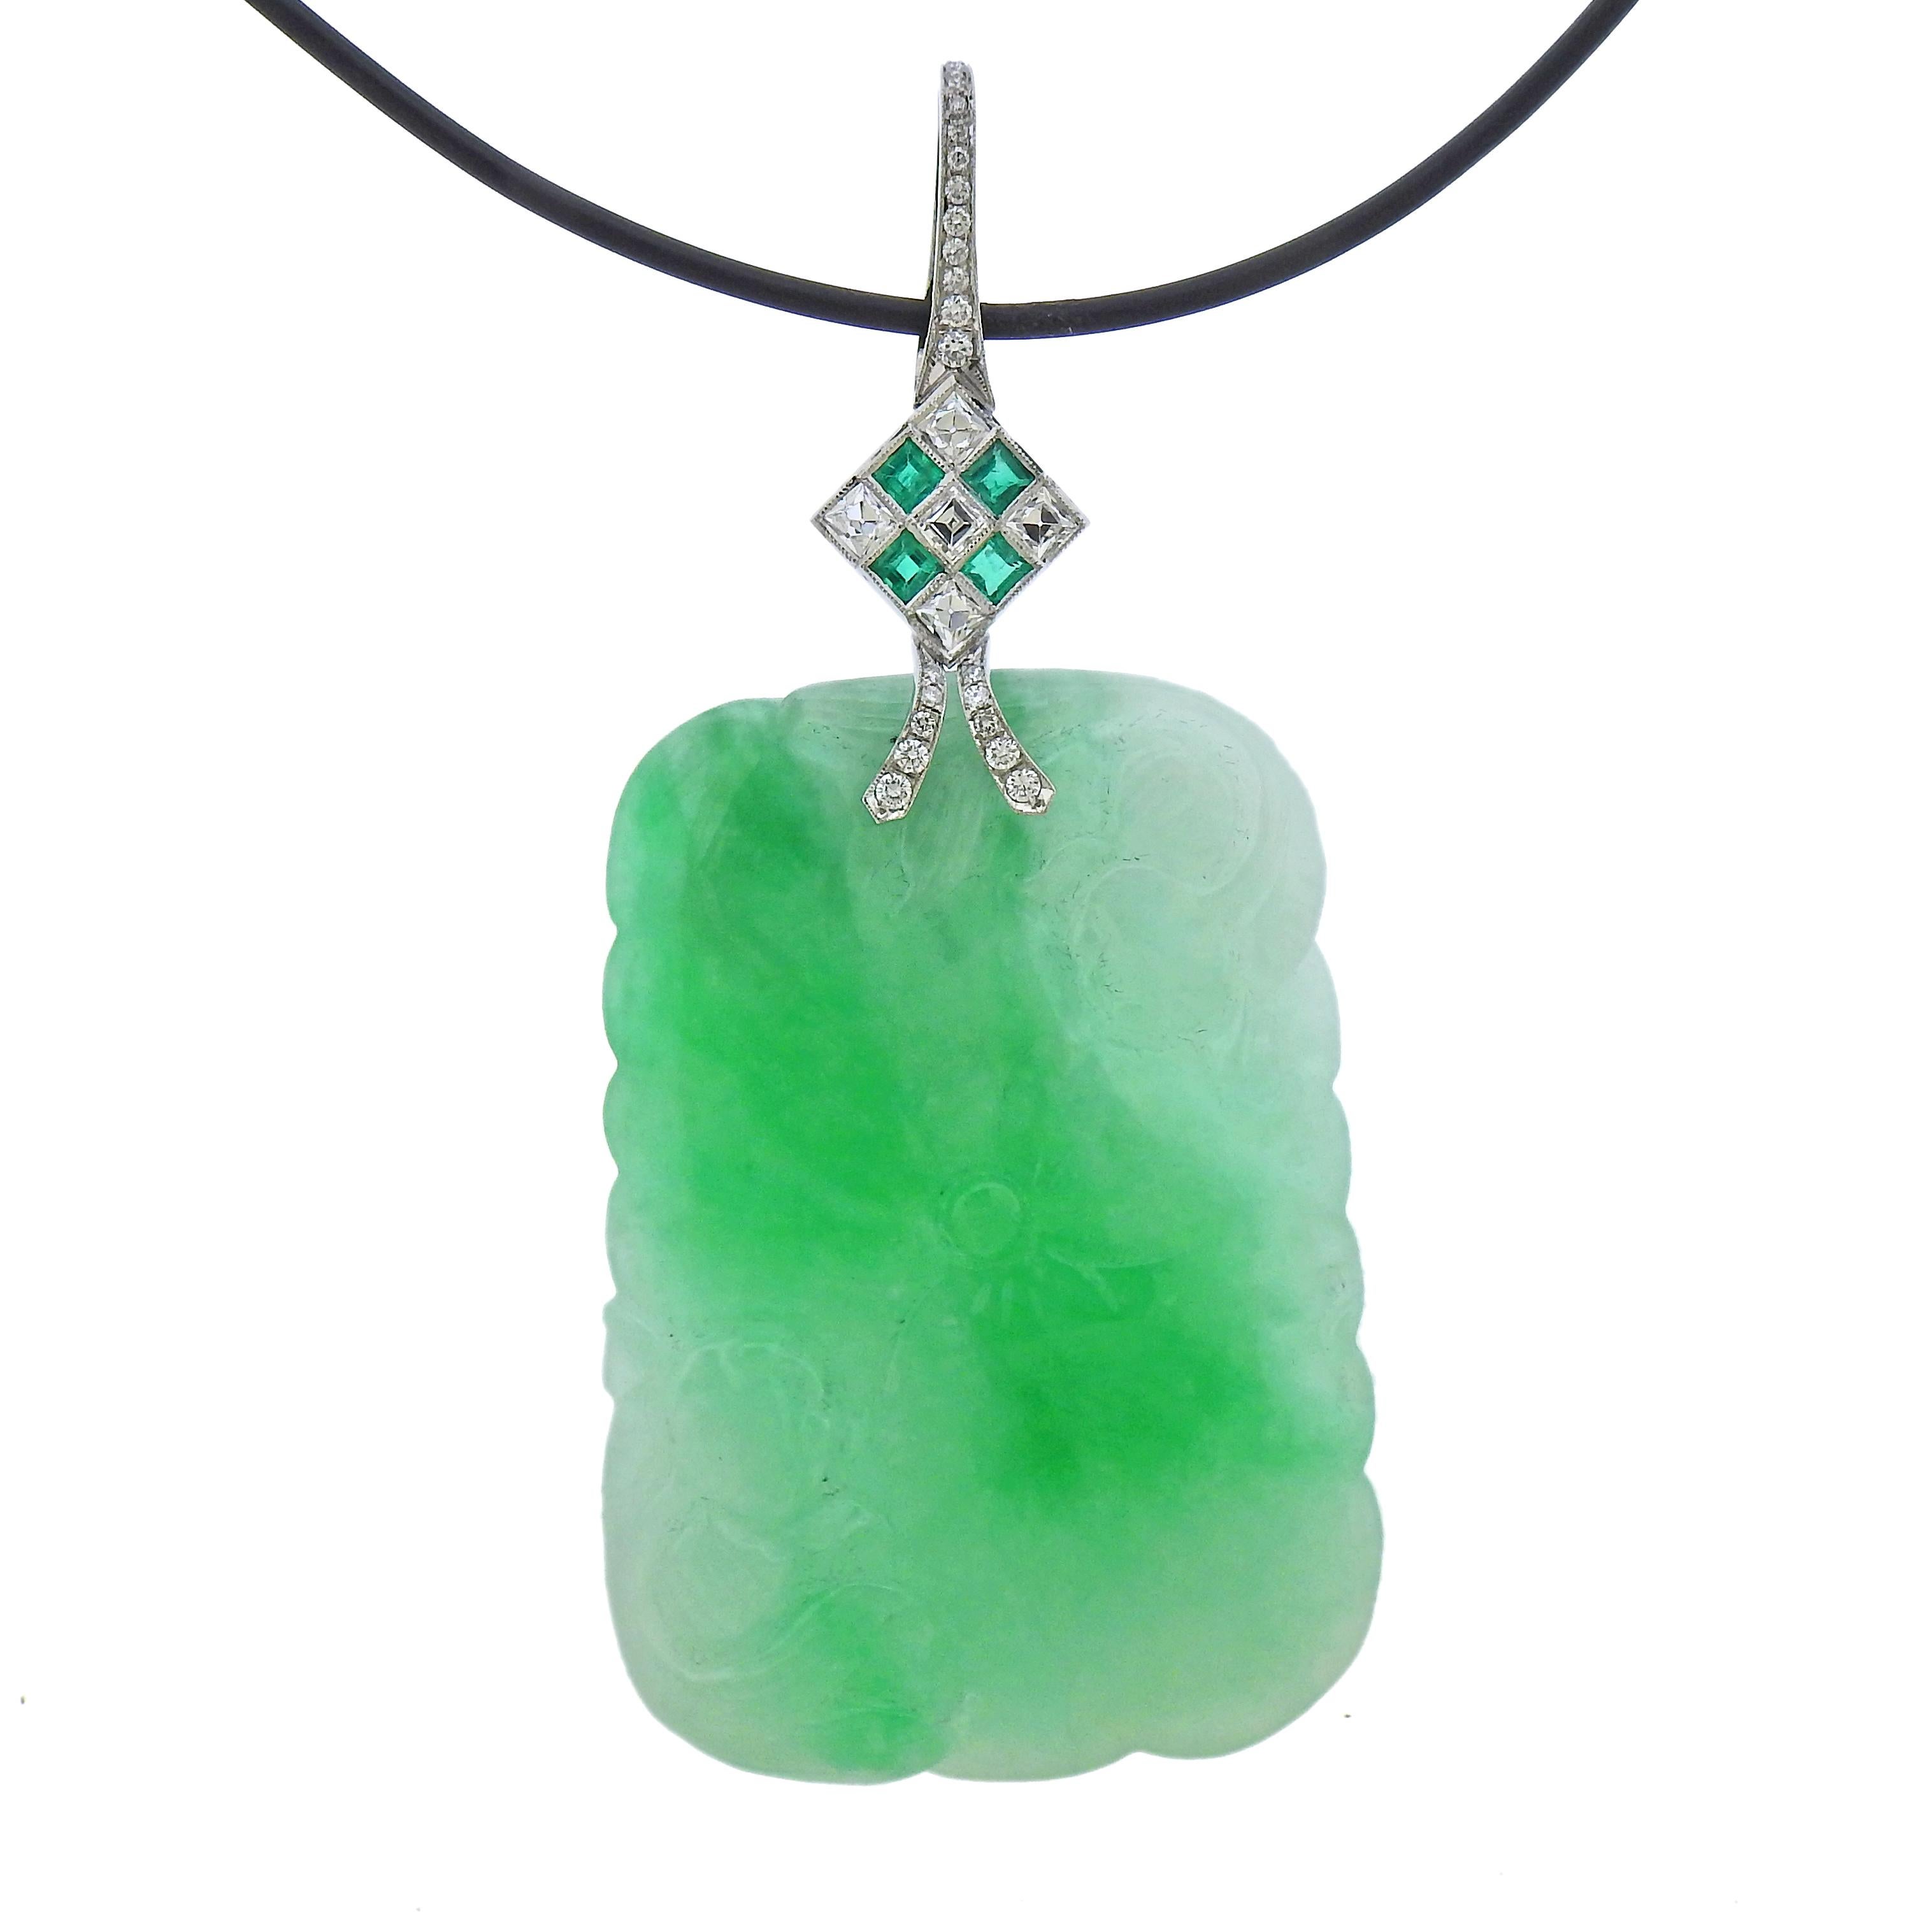 Large carved jade pendant, set in 18k white gold with approx. 1.20ctw in diamonds and emeralds, suspended on a rubber black cord necklace with 18k gold clasp. Pendant measures 97mm x 45mm (jade measures 64mm  x 45mm), Necklace is 17.5